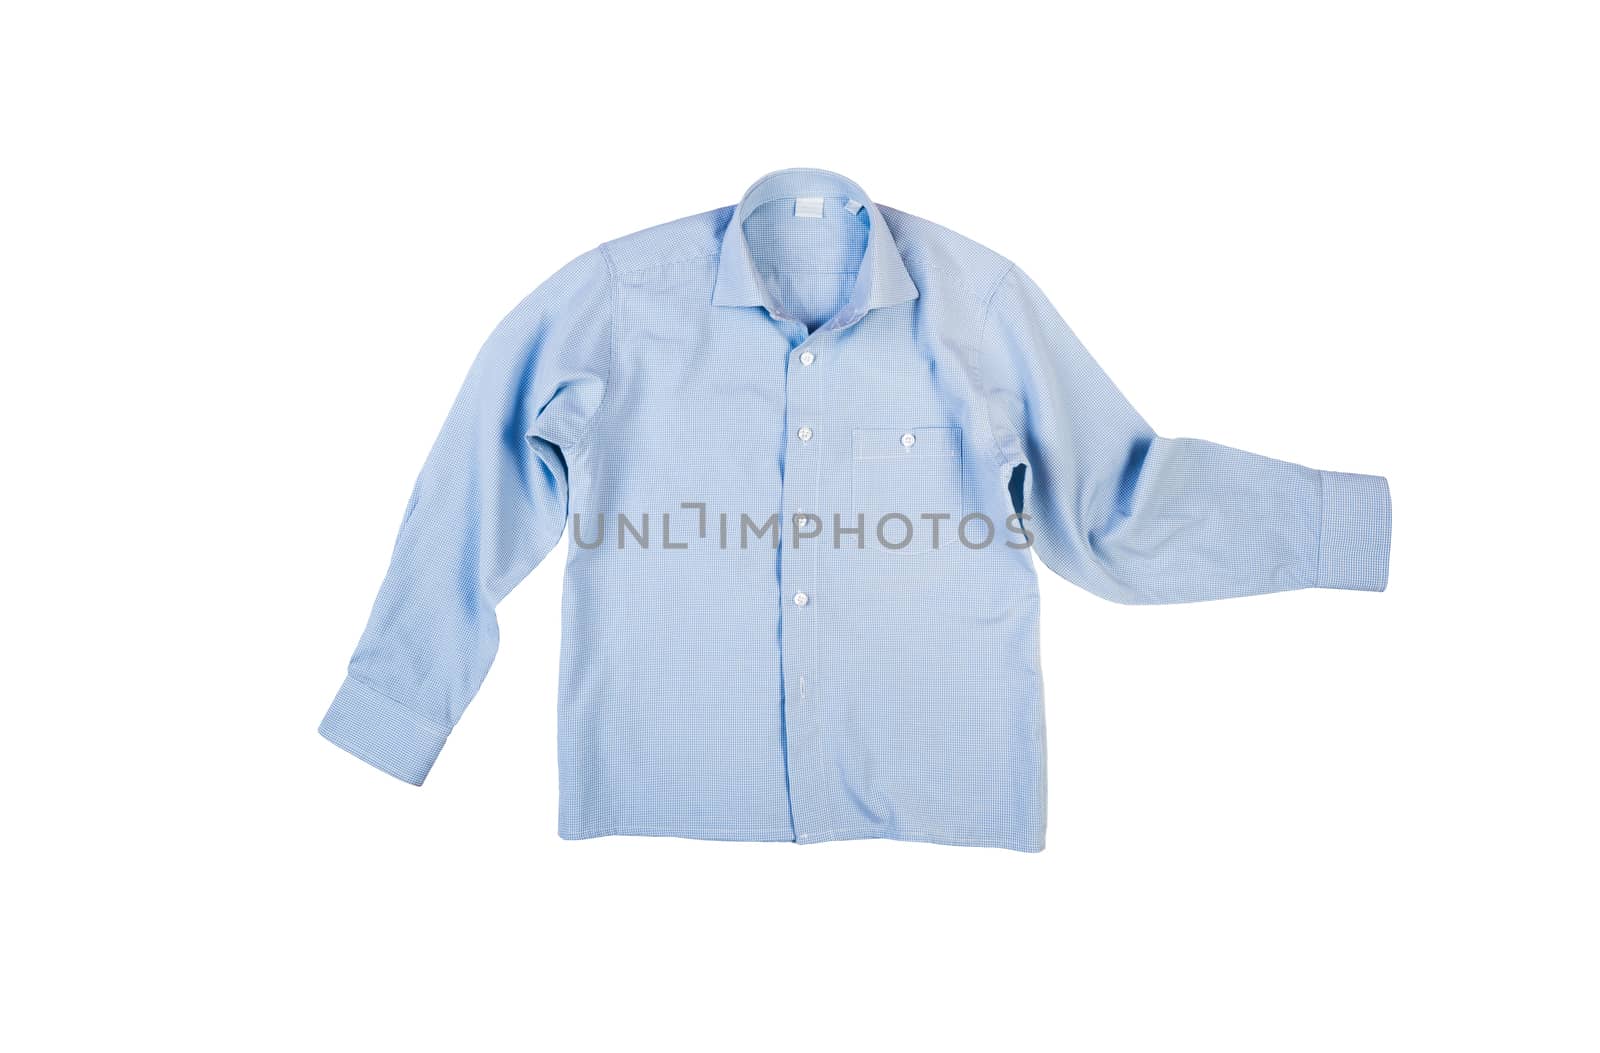  blue clean ironed men's shirts Isolated on white background